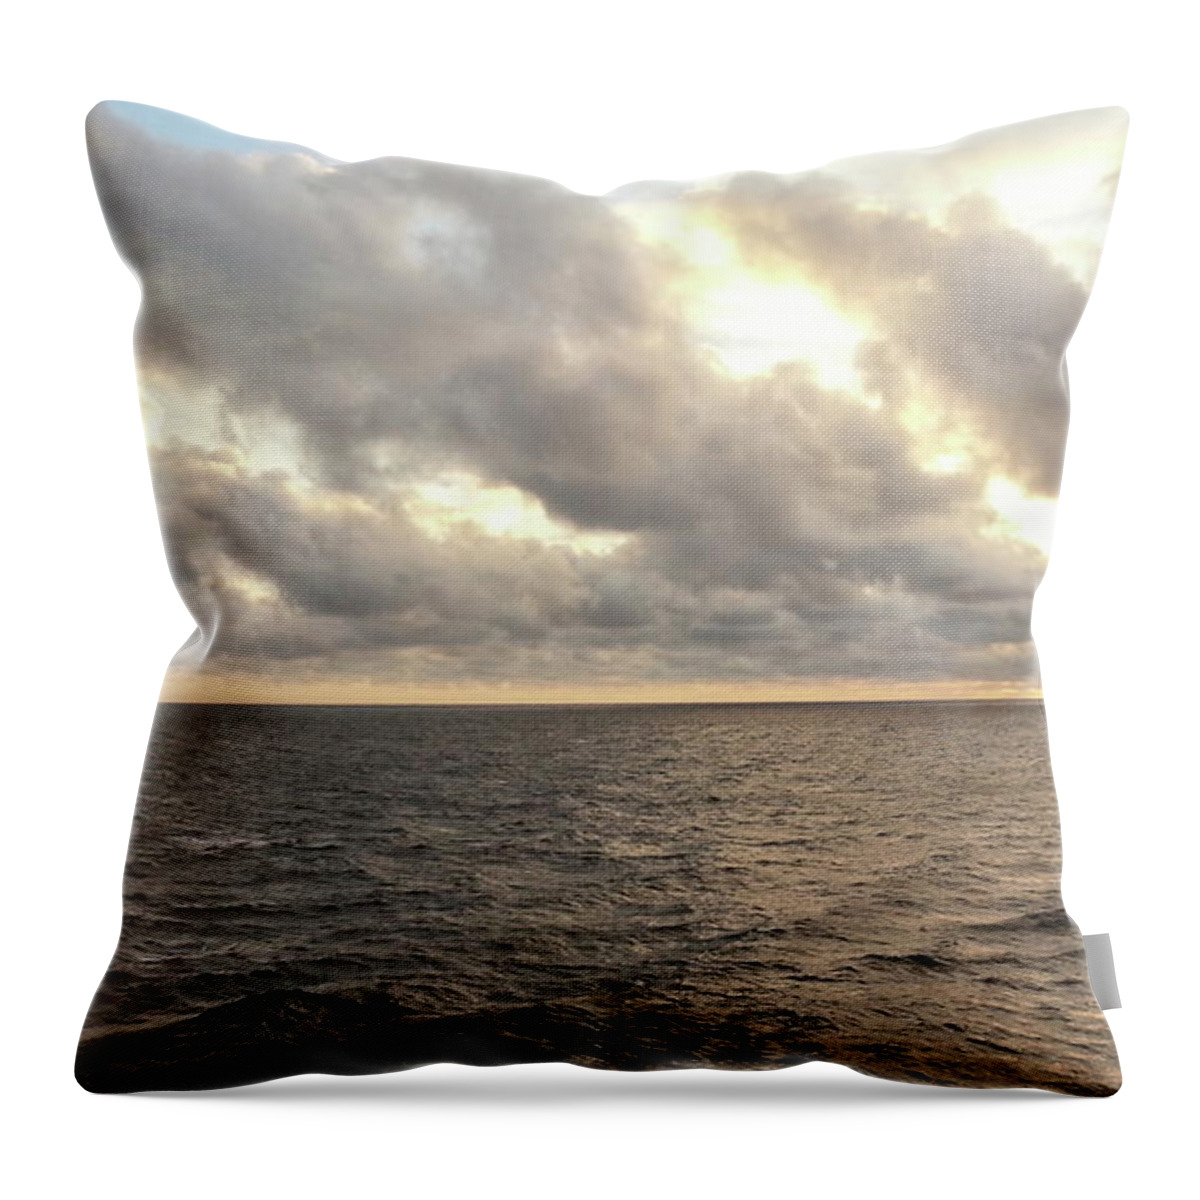 Cruise Throw Pillow featuring the photograph Nature's Realm by Robert Knight